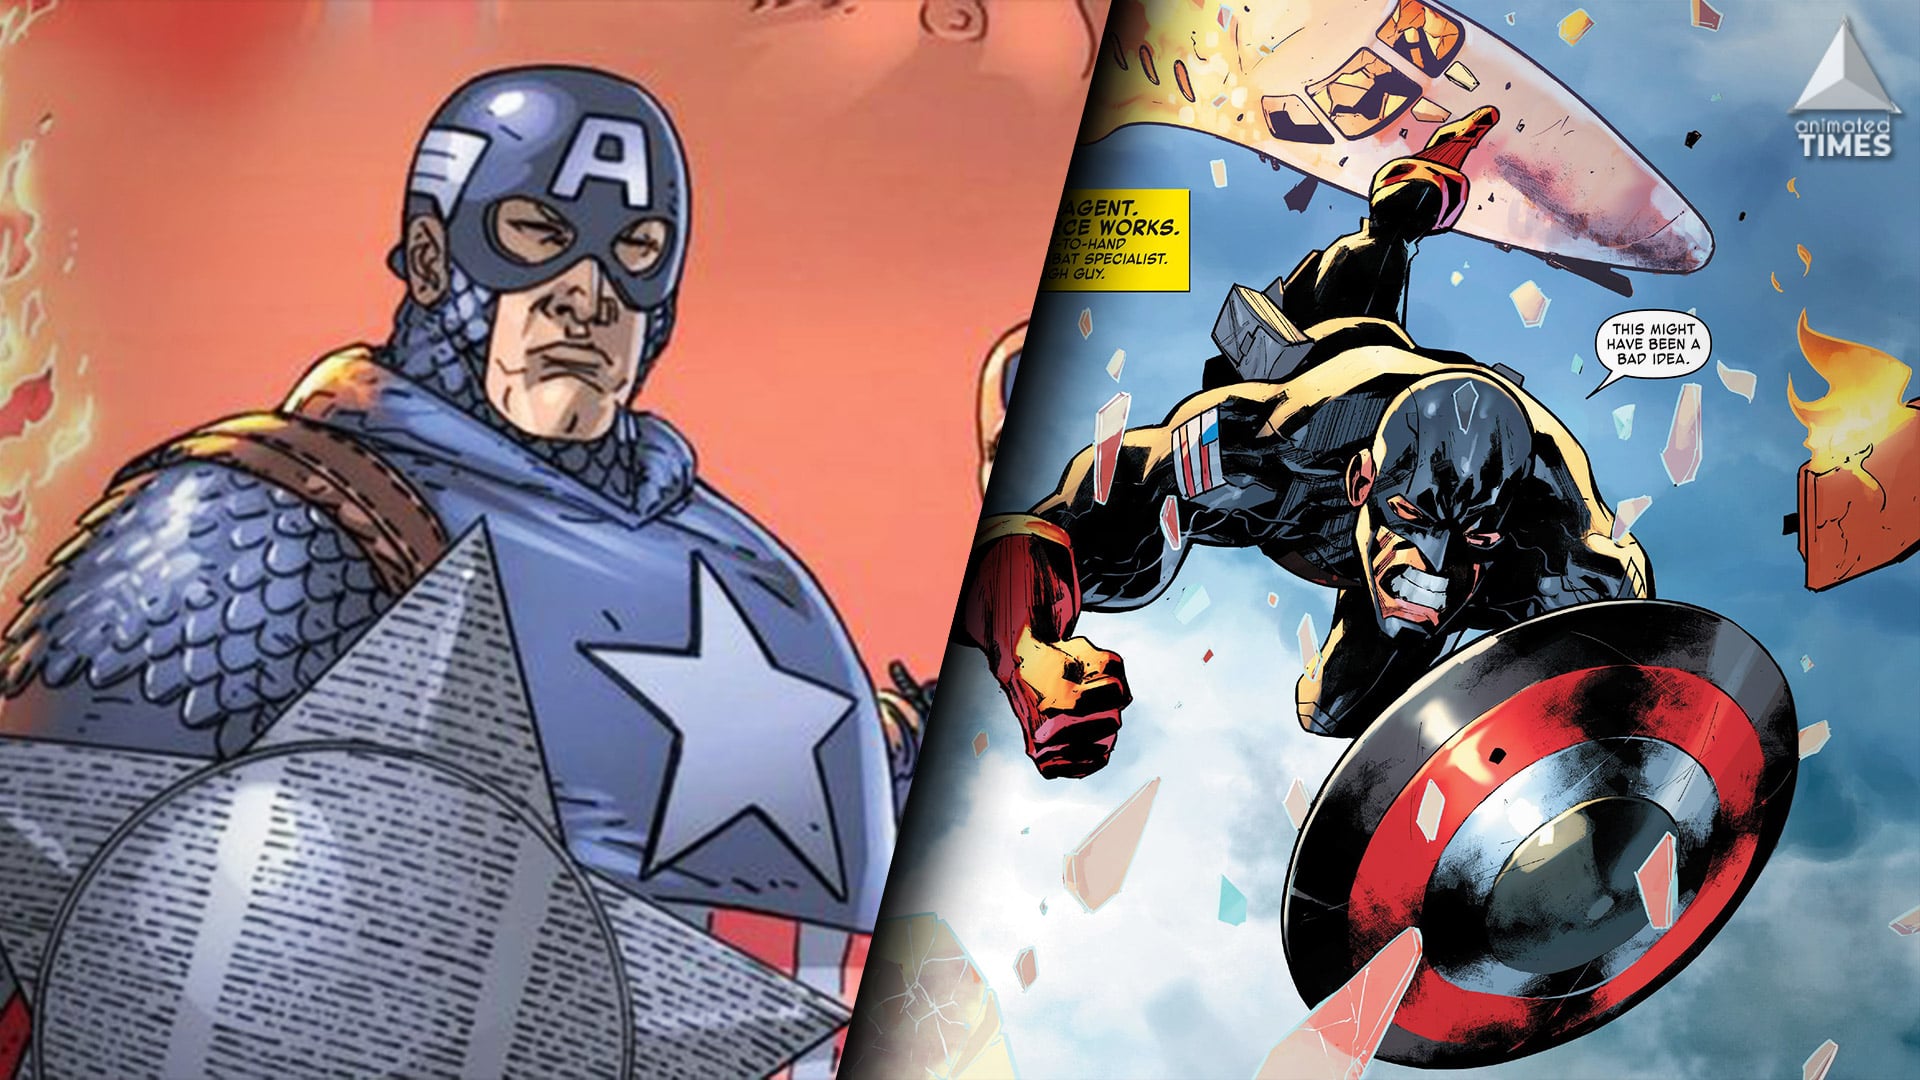 US Agent: The Fanatic Captain America’s Greatest Costumes, Ranked